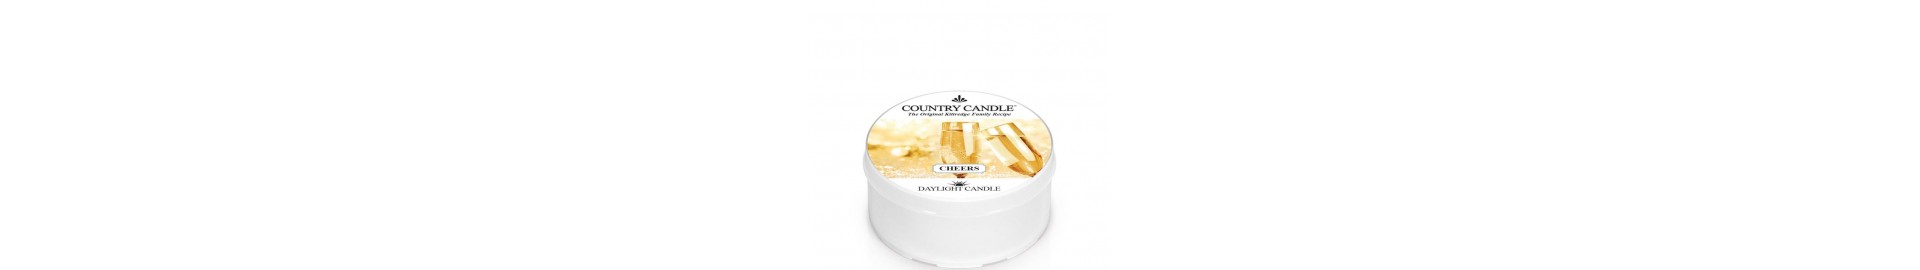 DAYLIGHT COUNTRY CANDLE